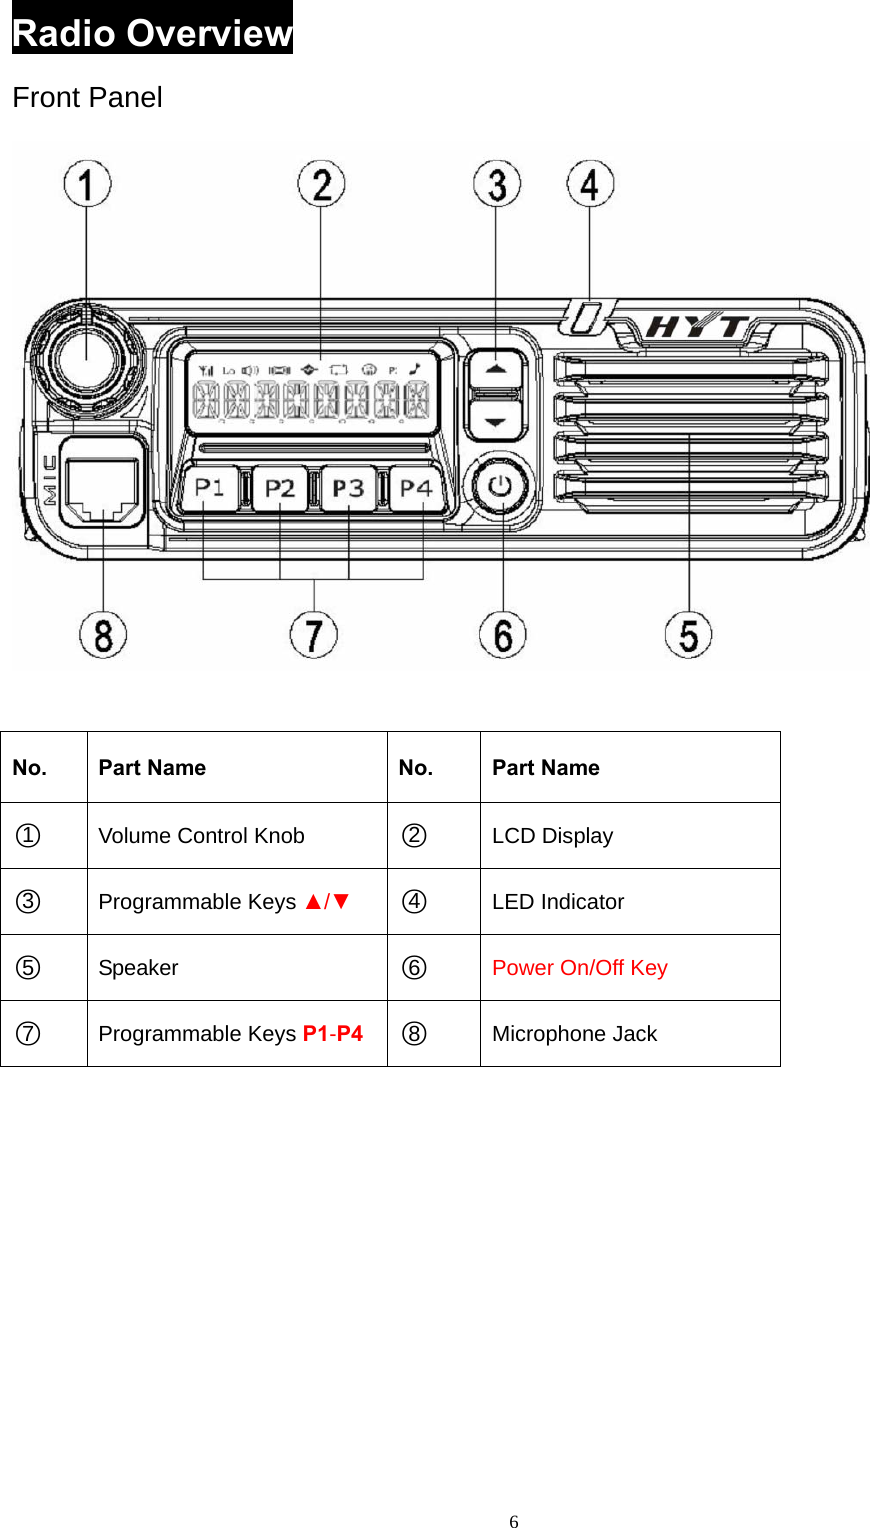  6Radio Overview Front Panel   No. Part Name No. Part Name ○1 Volume Control Knob ○2 LCD Display   ○3 Programmable Keys ▲/▼ ○4 LED Indicator   ○5 Speaker ○6 Power On/Off Key ○7 Programmable Keys P1-P4 ○8 Microphone Jack  